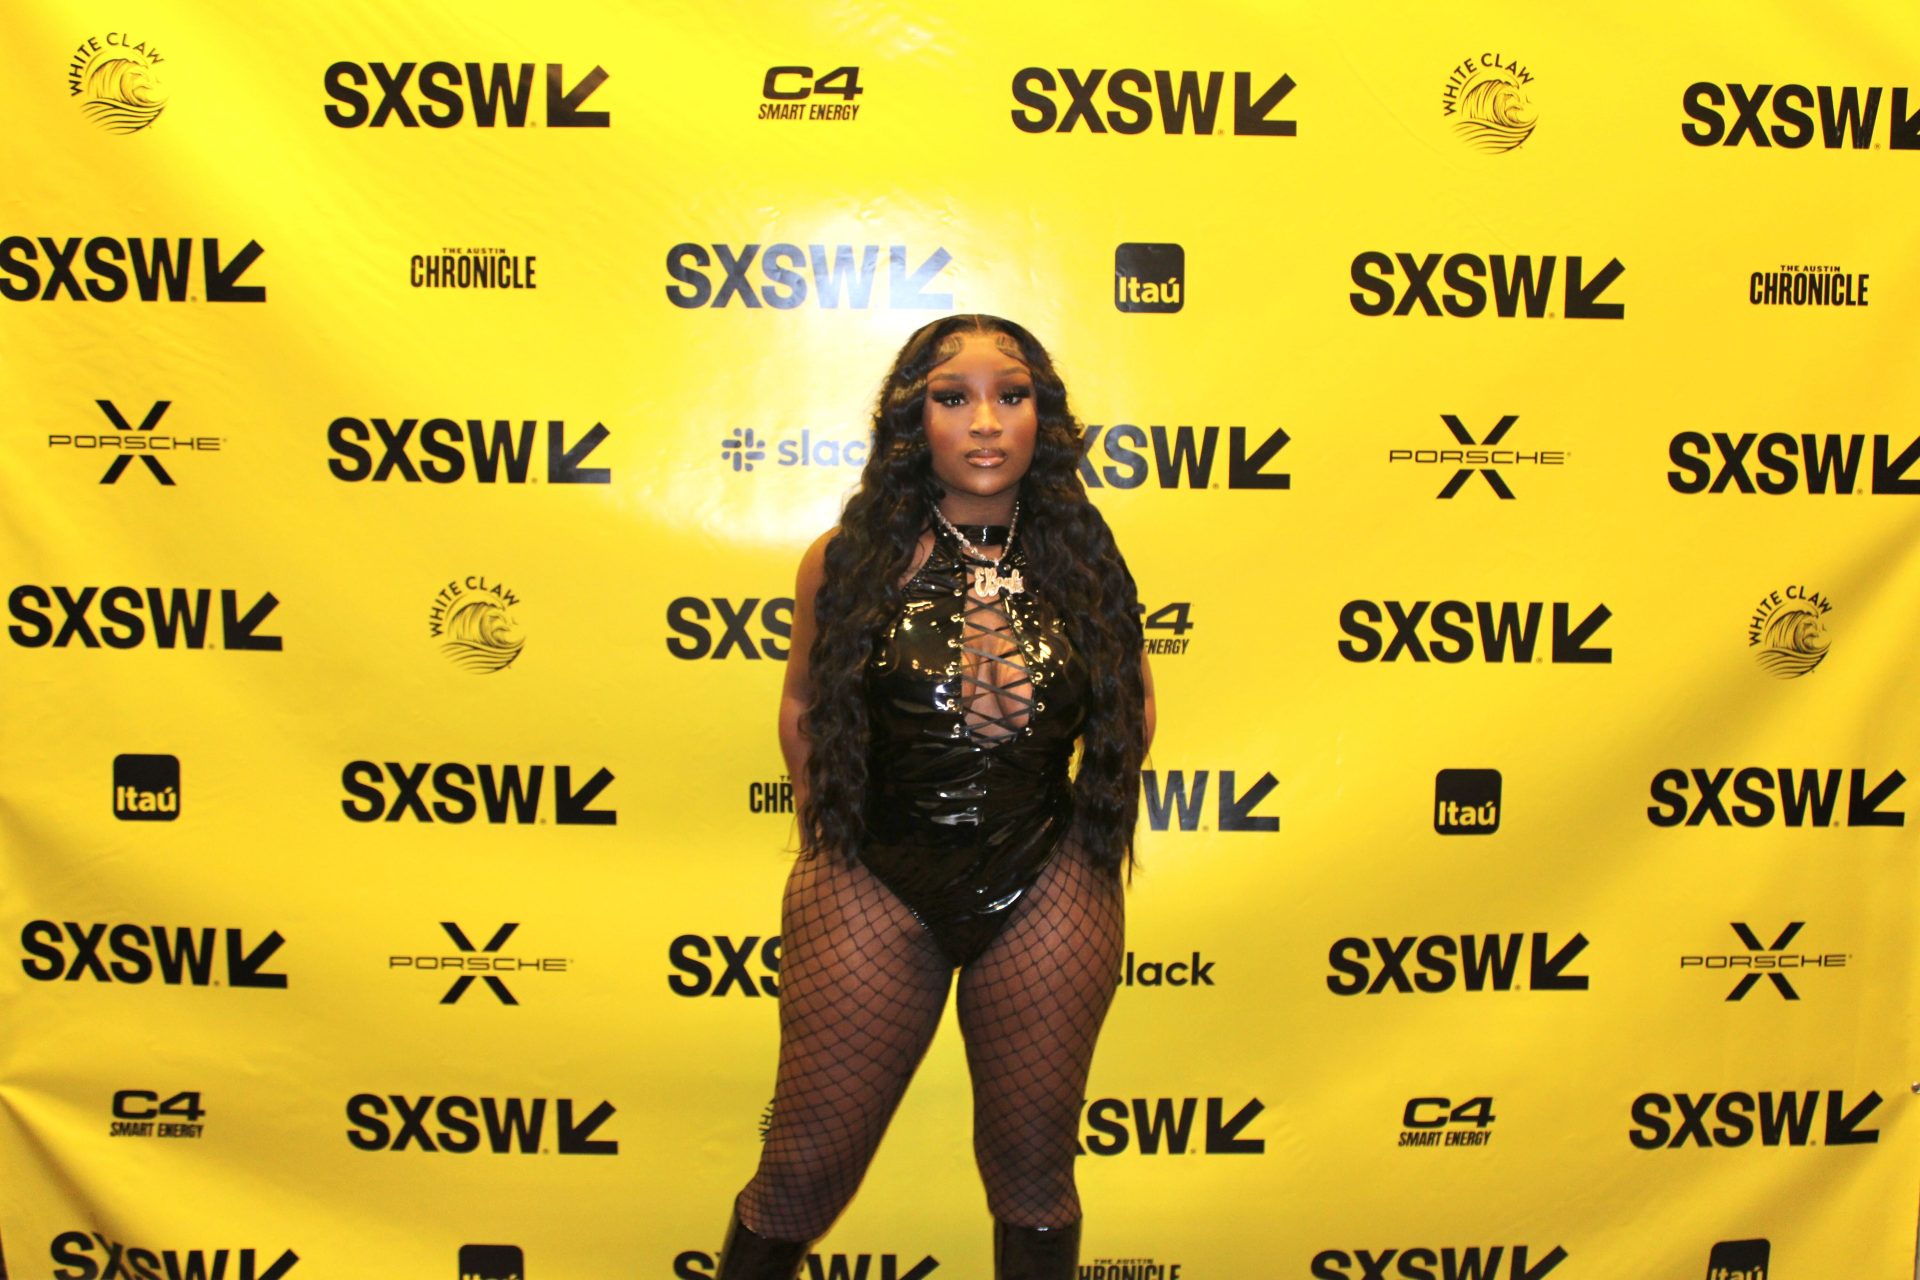 (EXCLUSIVE) Erica Banks Steps Into The Shade Room To Talk About Megan Thee Stallion, Nicki Minaj, BBLs, Who’d She’d Shoot Her Shot At, And More!